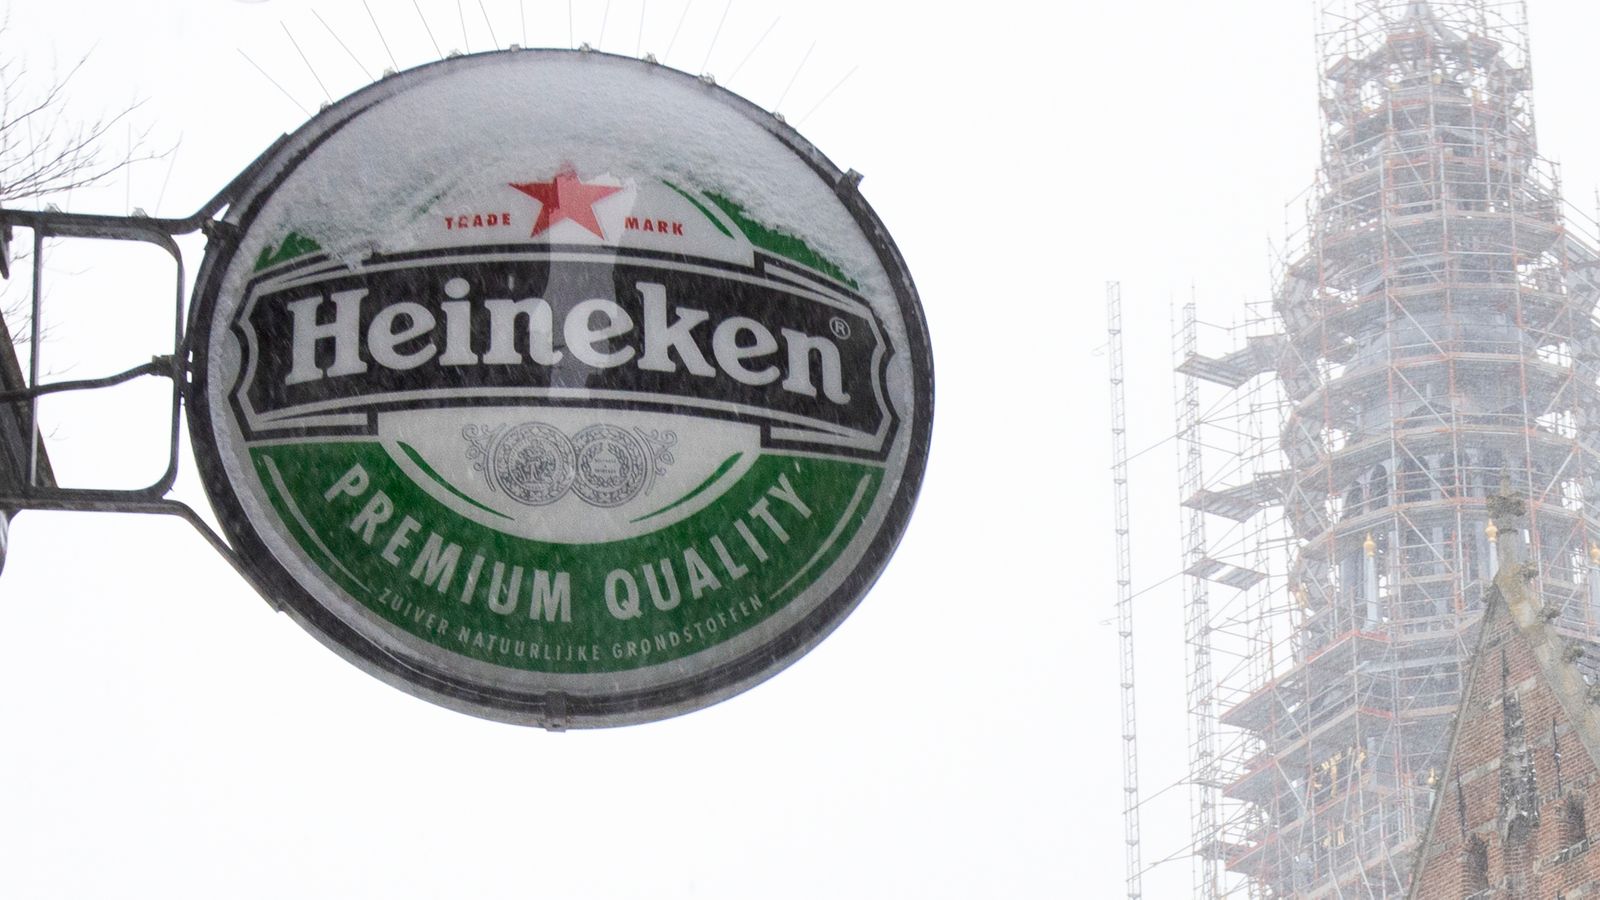 Heineken expects higher beer prices due to inflation